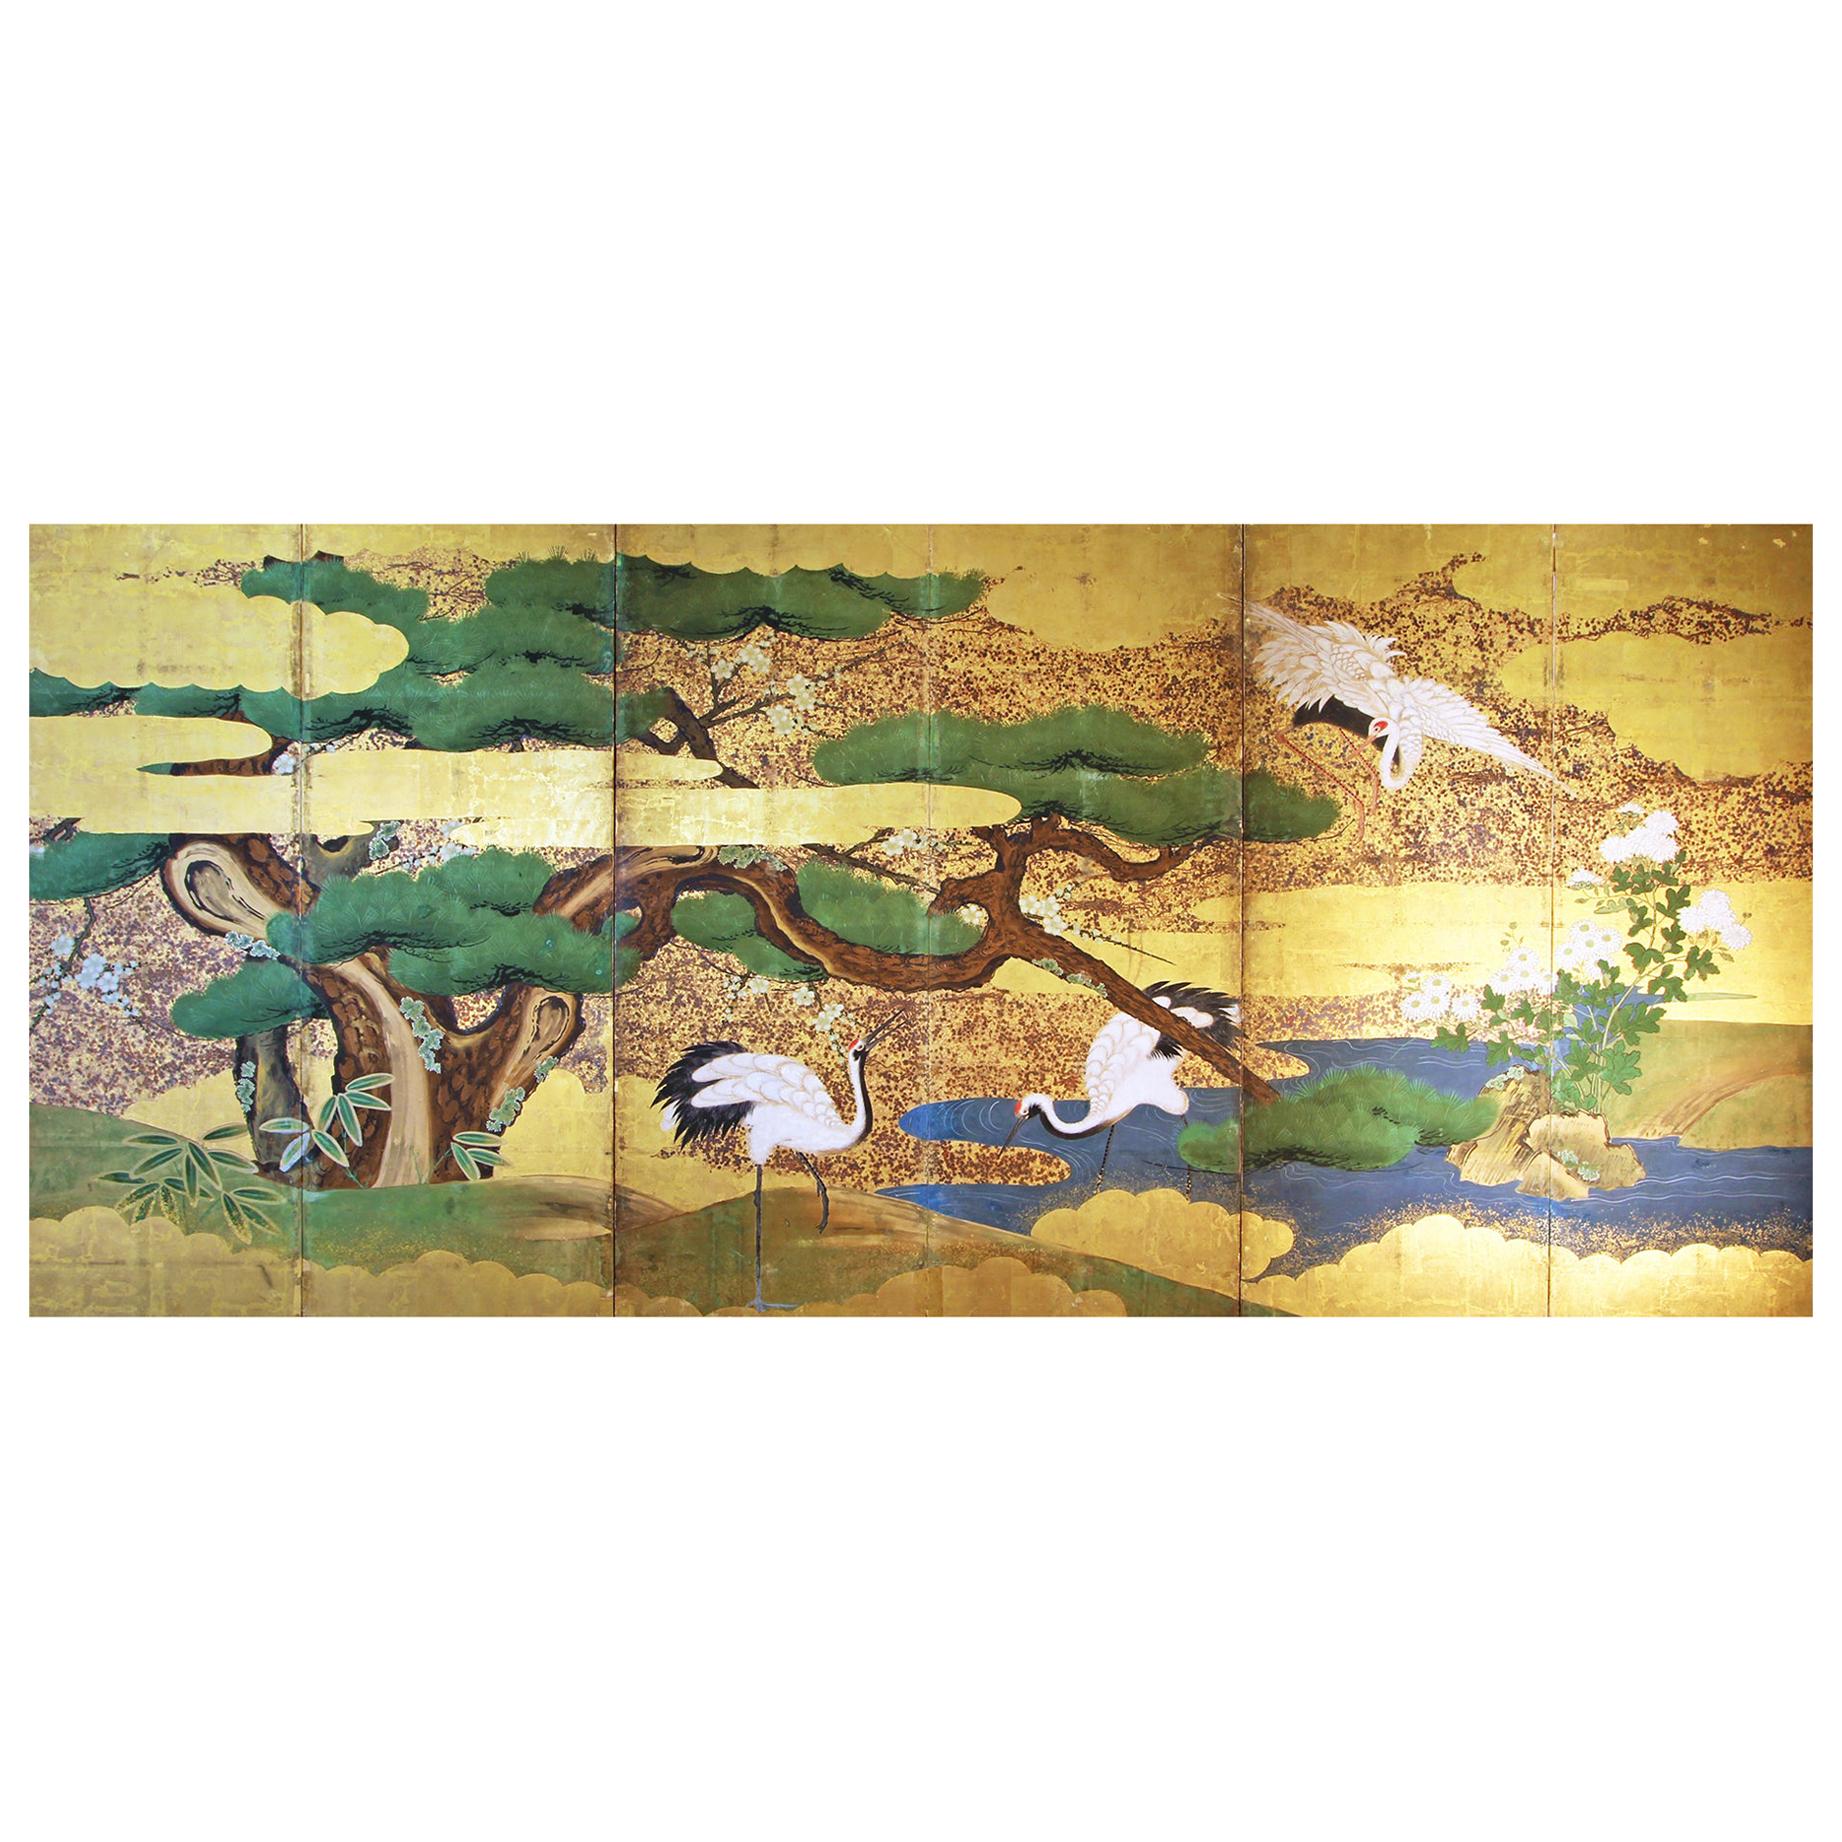 Japanese Landscape Folding Screen Rice Paper and Gold Leaf